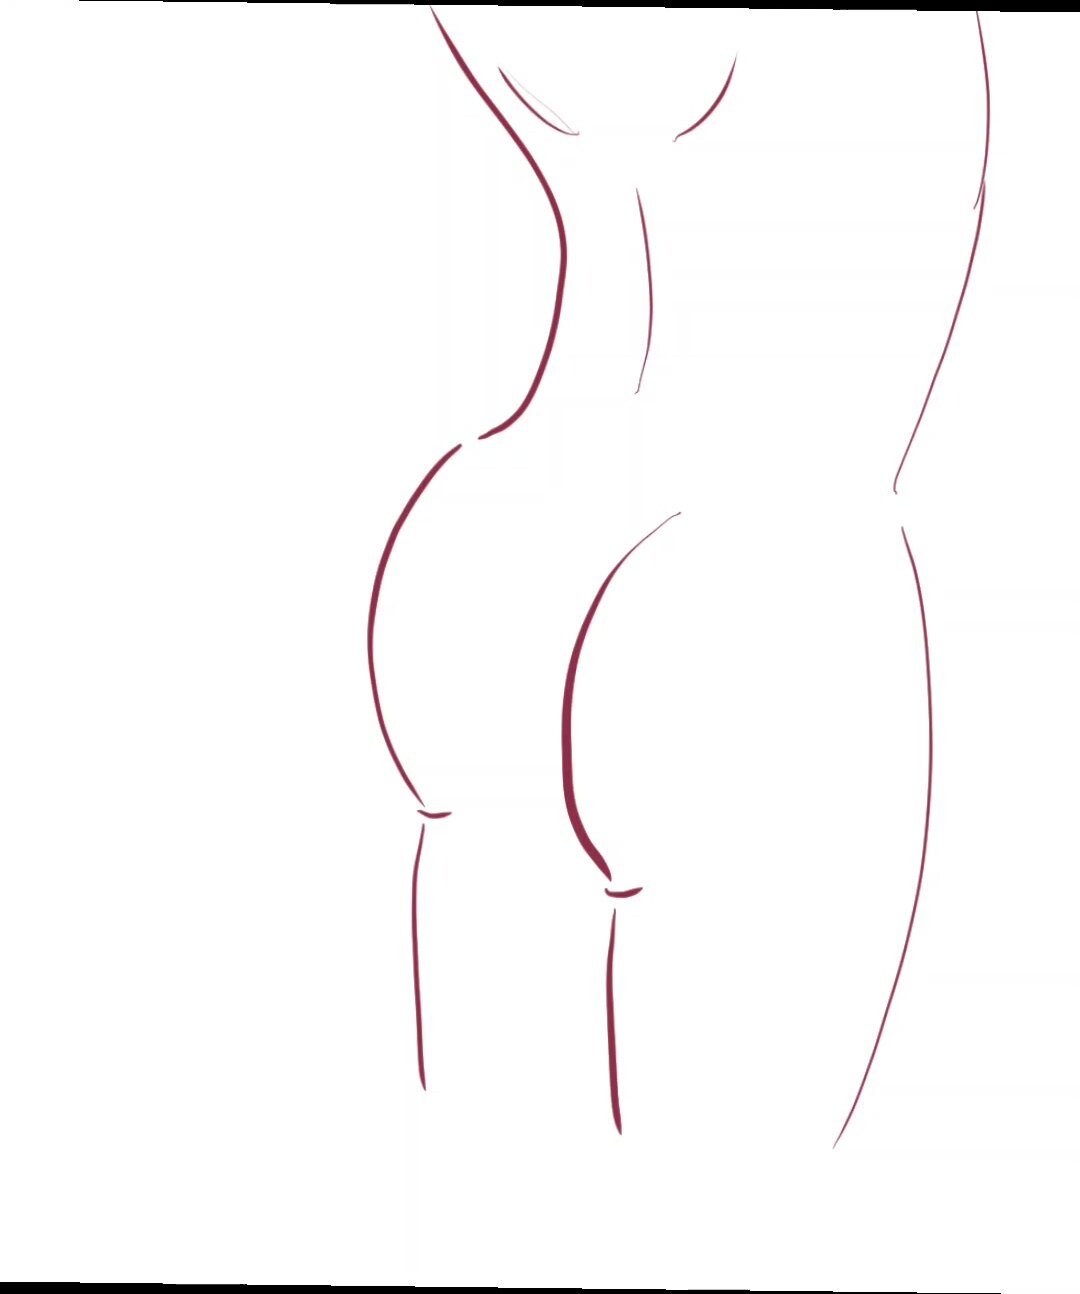 Ass (my first drawing)